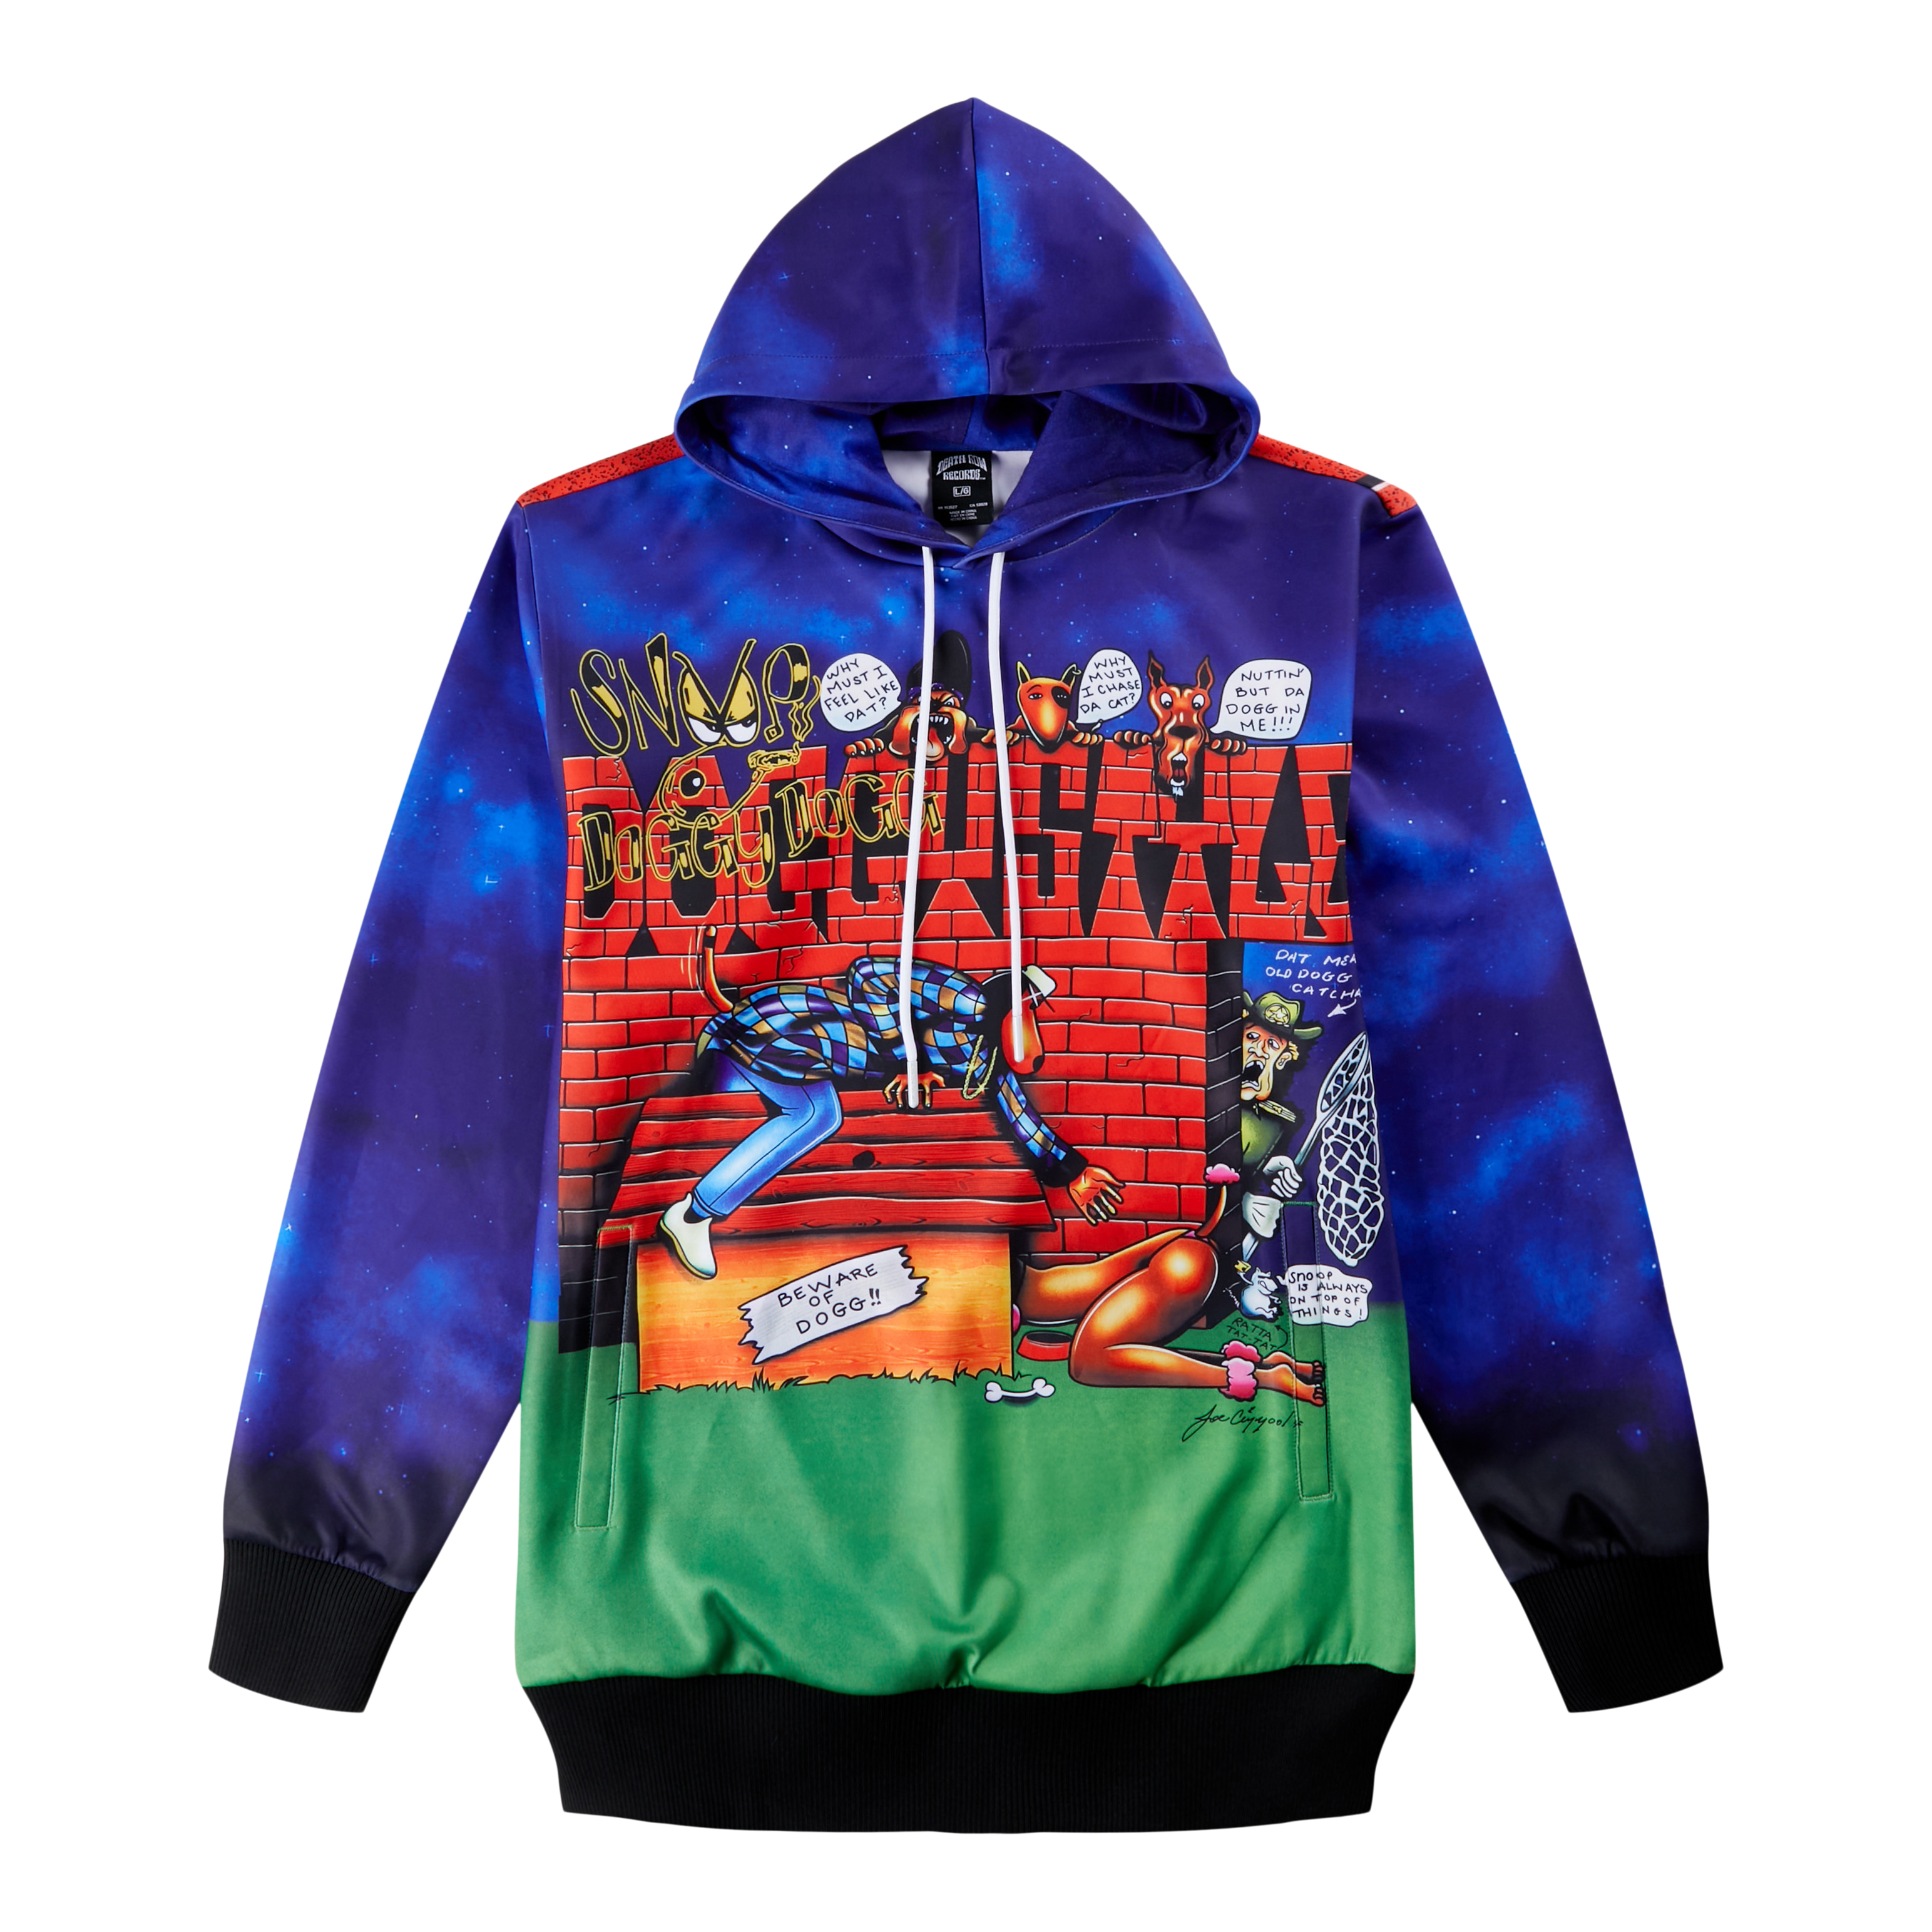 Doggystyle Album Cover Hoodie